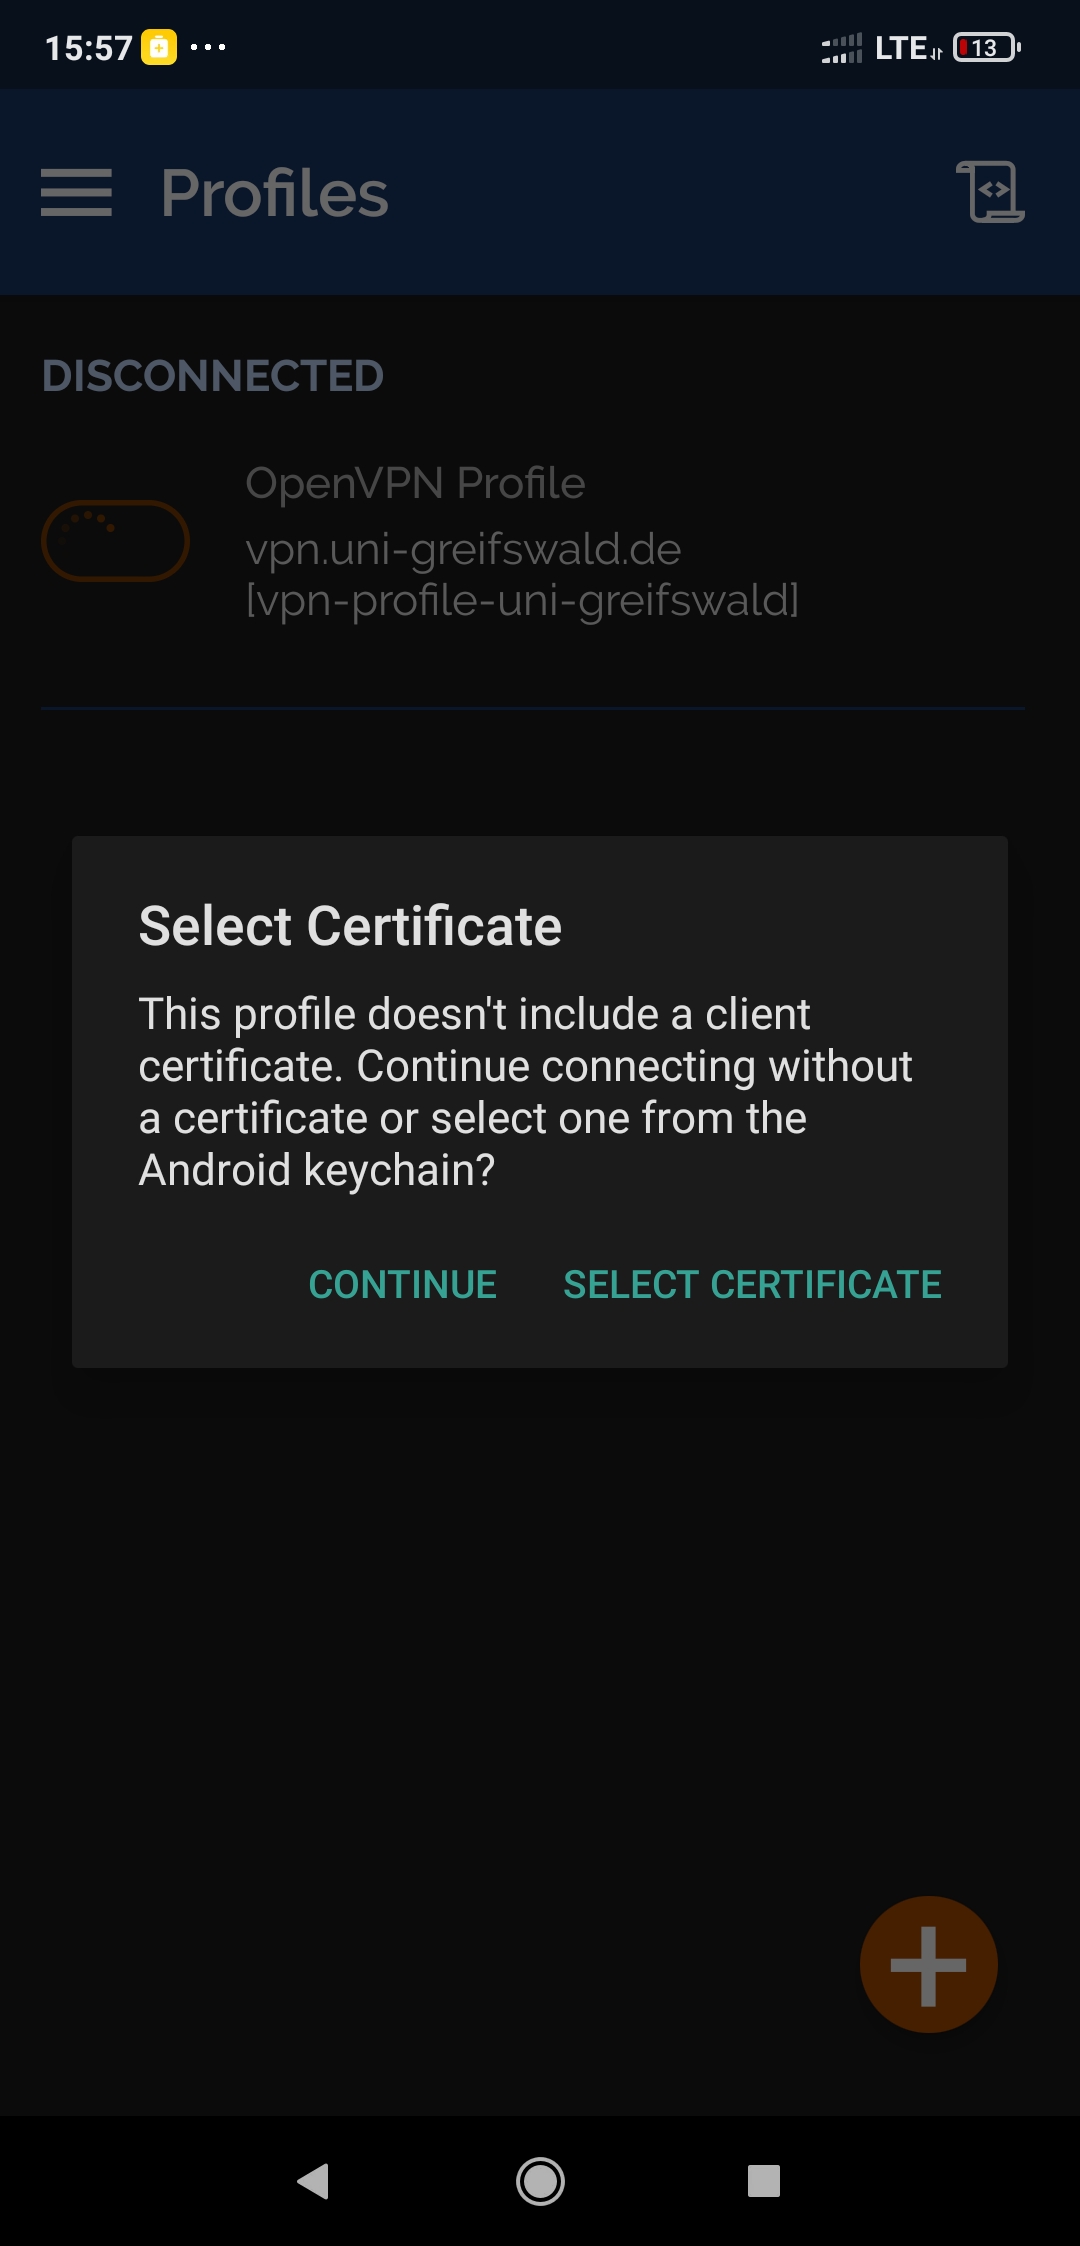 Ignore the certificate dialogue